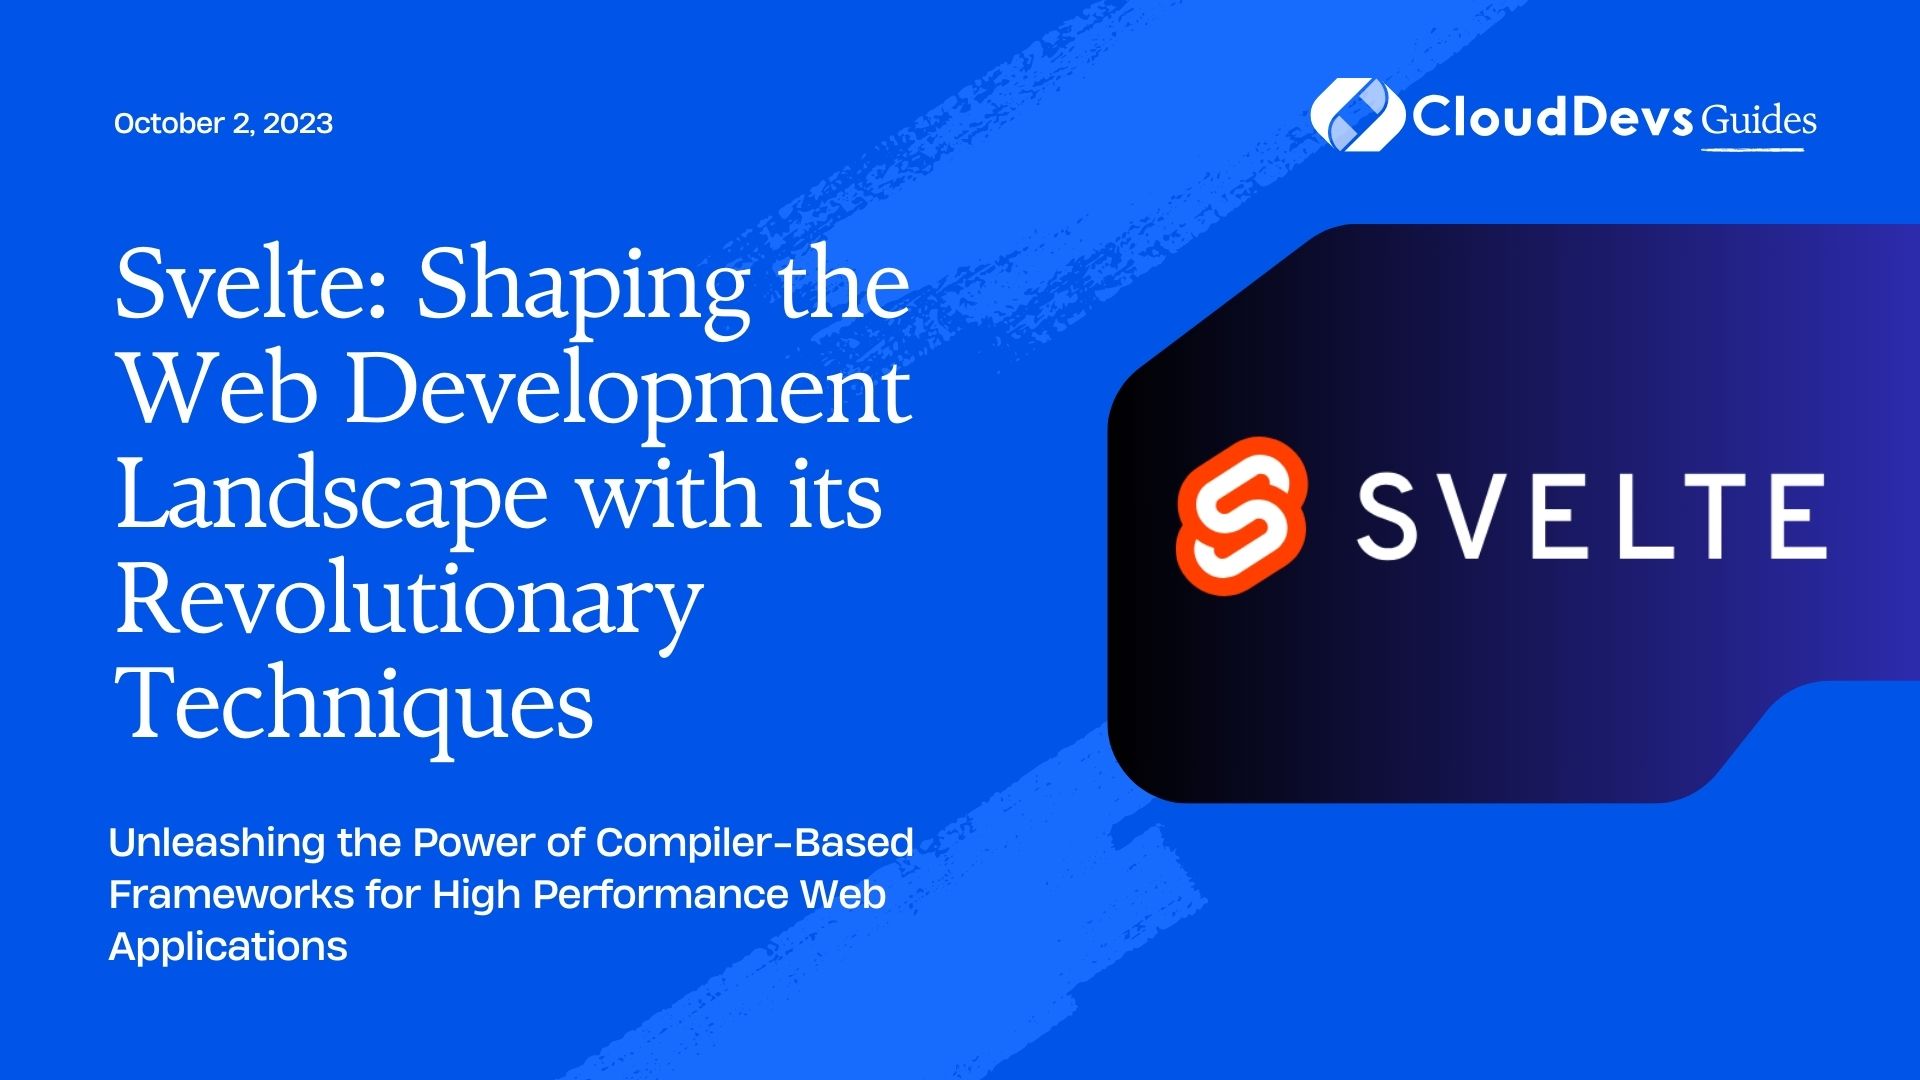 Svelte: Shaping the Web Development Landscape with its Revolutionary Techniques